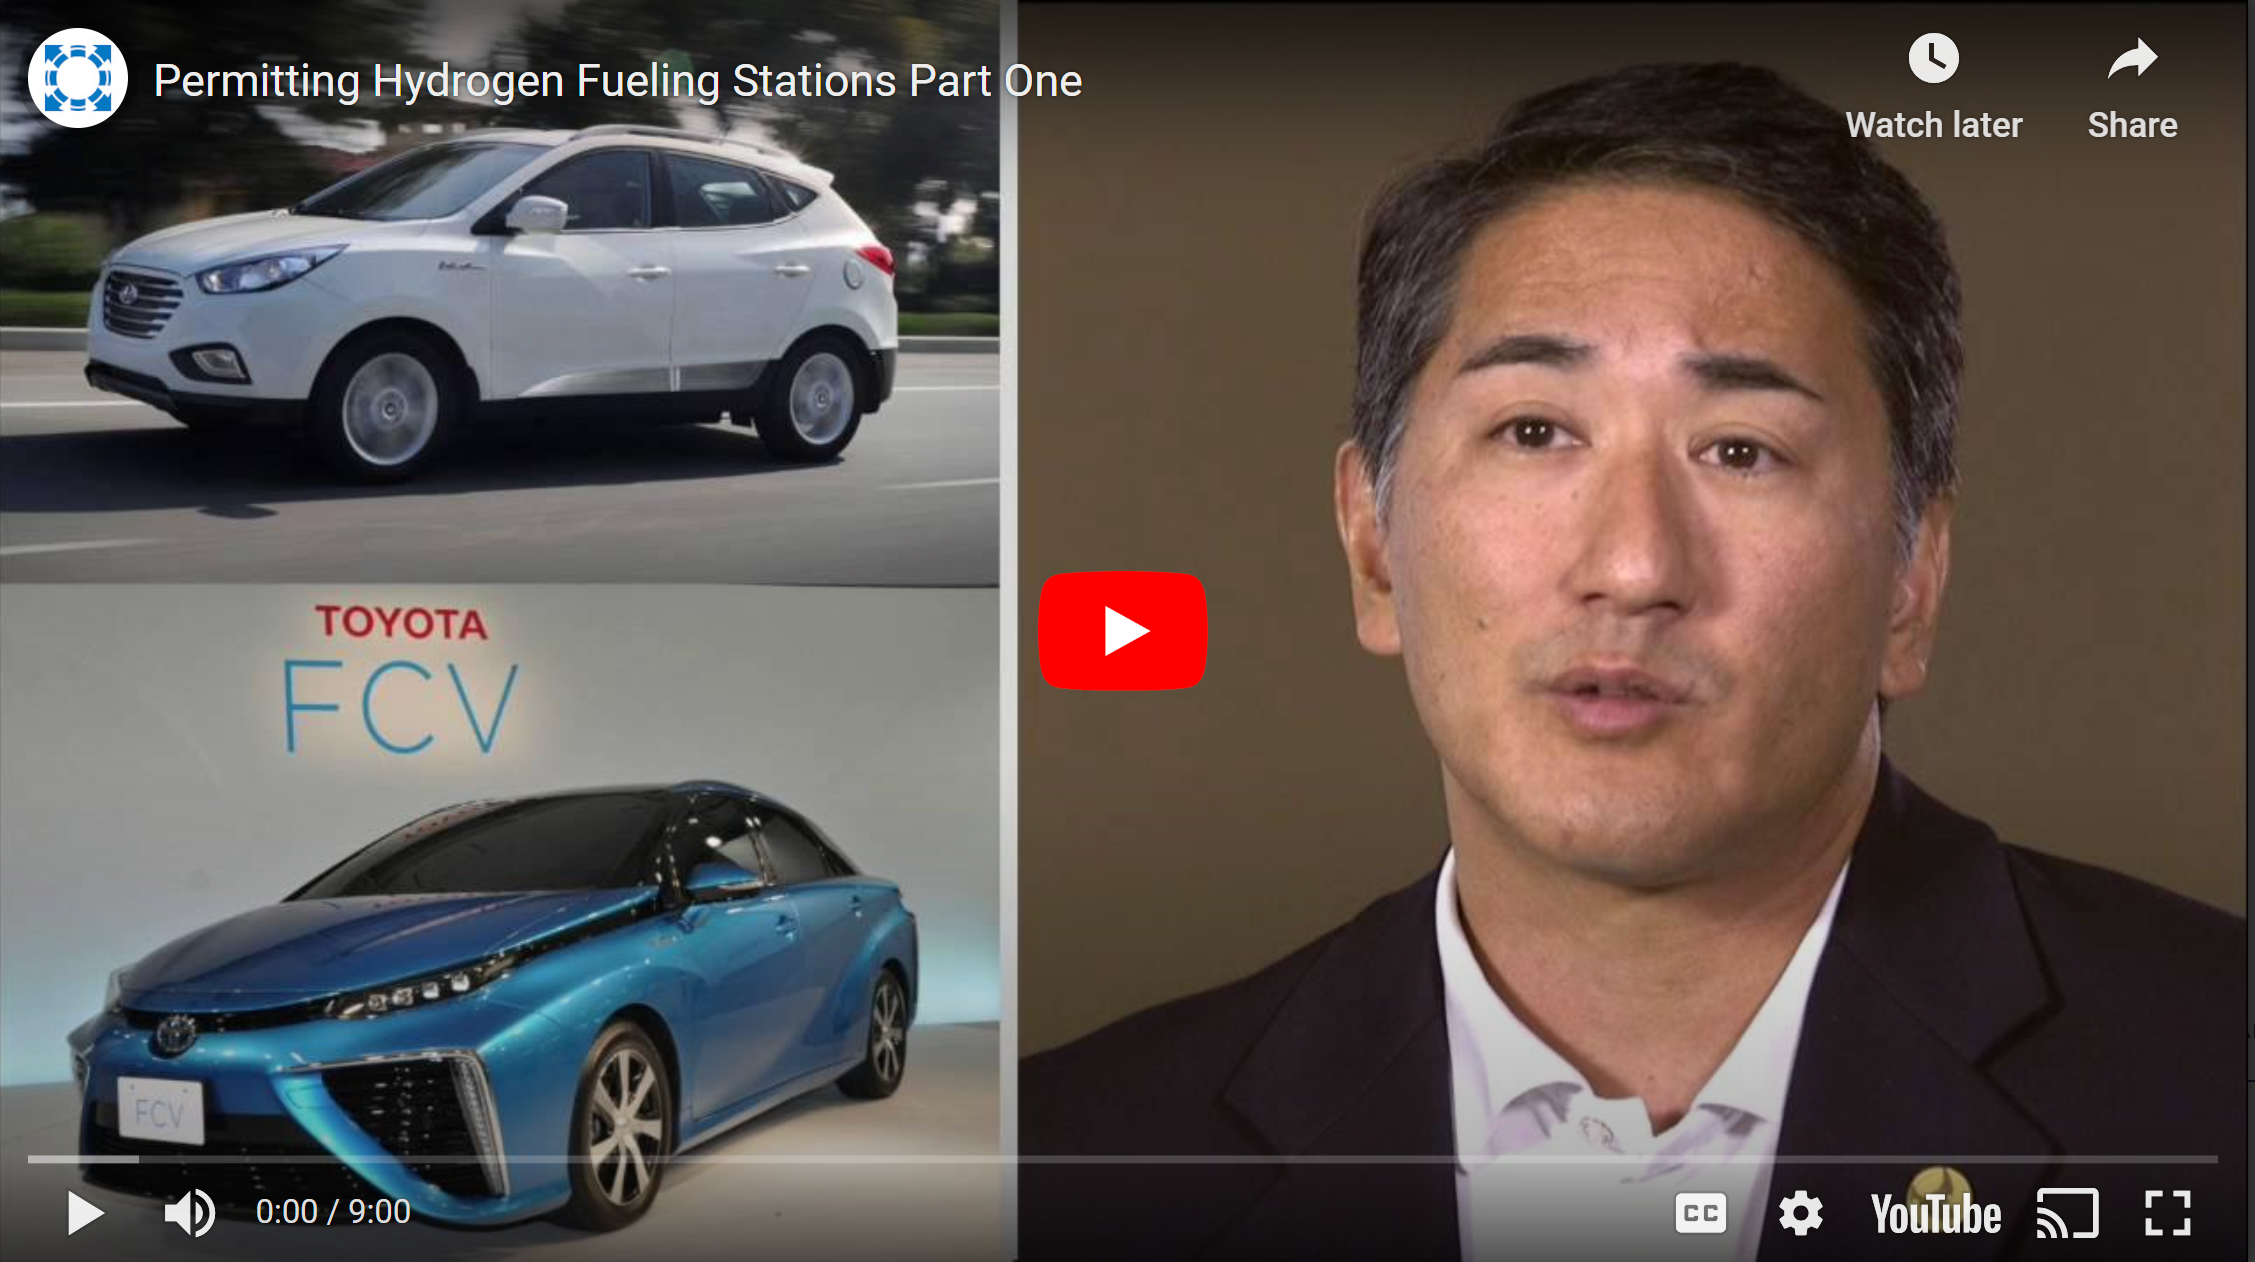 Permitting Hydrogen Fueling Stations Part One